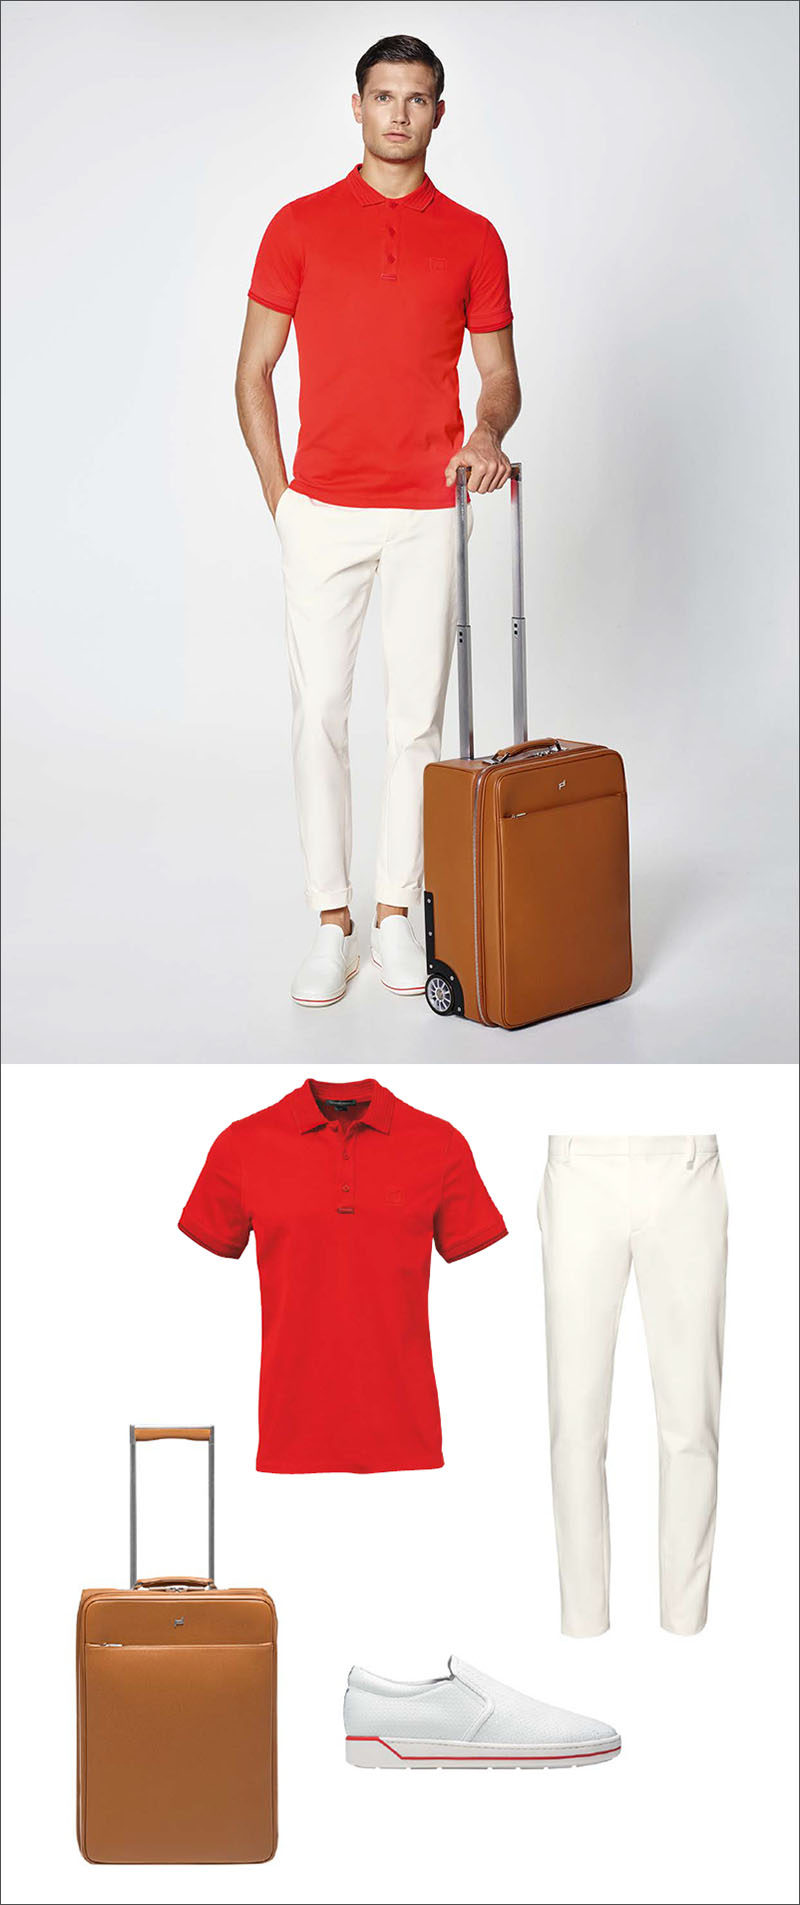 Men's Fashion Ideas - 17 Men's Outfits From Porsche Design's 2017 Spring/Summer Collection | This casual men's outfit combines a red polo with white cotton pants, a pair of red and white slip on sneakers, and a light brown suitcase.